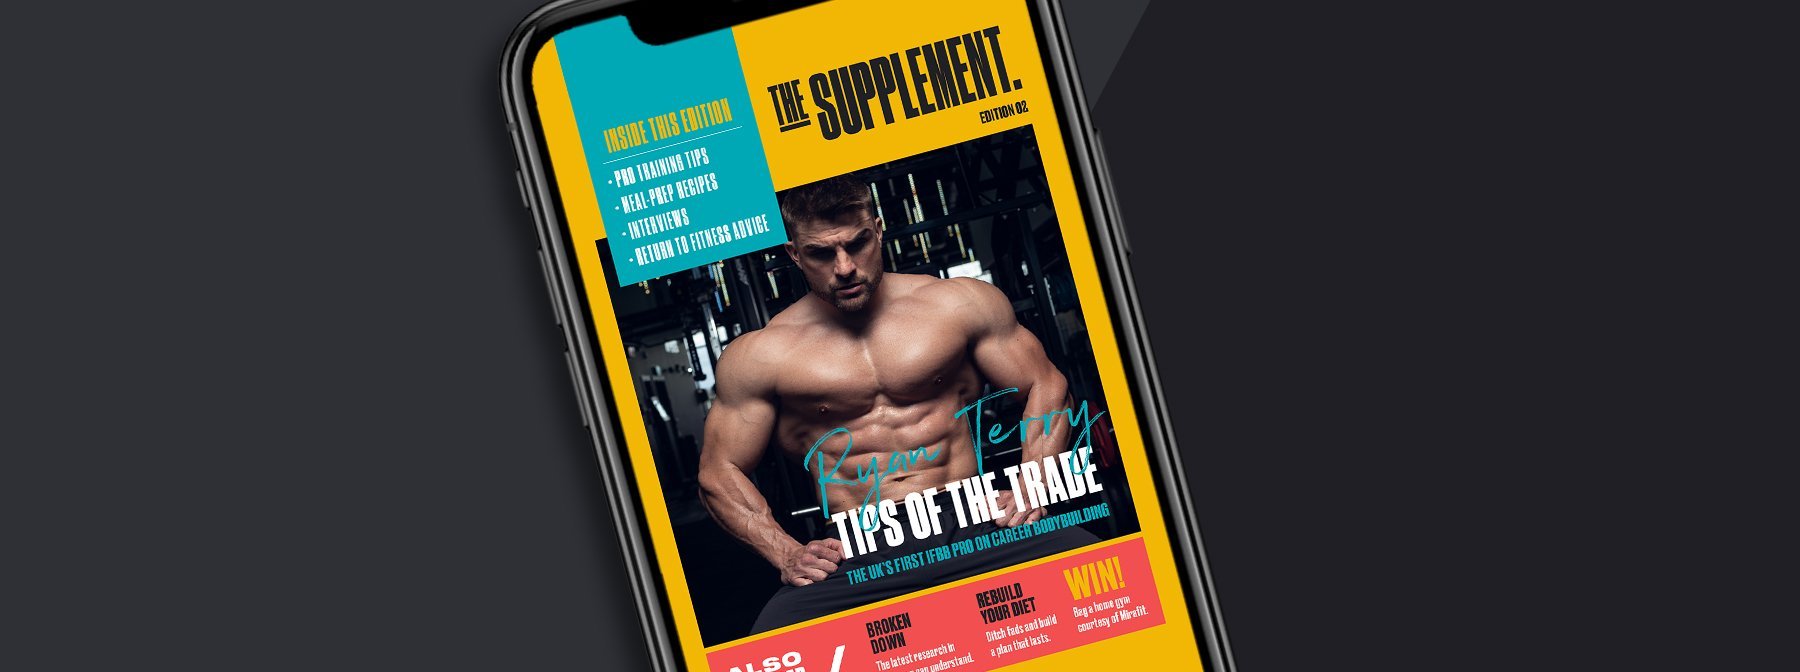 Myprotein Digital Magazine: The Supplement Edition Two Is Out Now